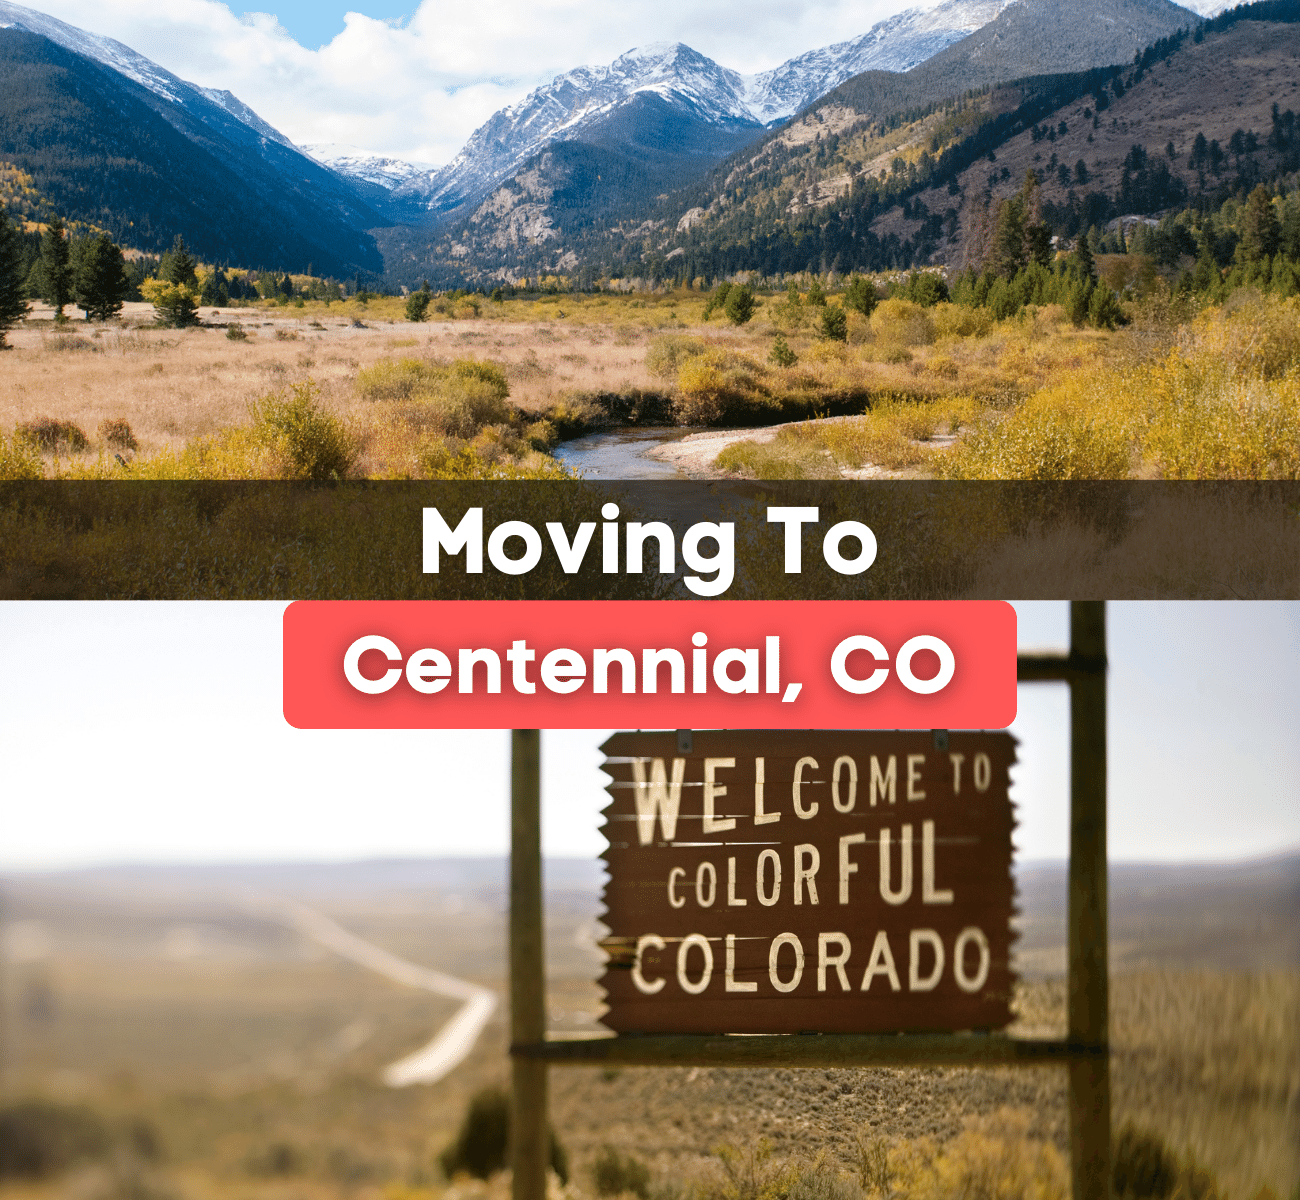 Moving to Centennial, CO - what is it like living in Centennial?